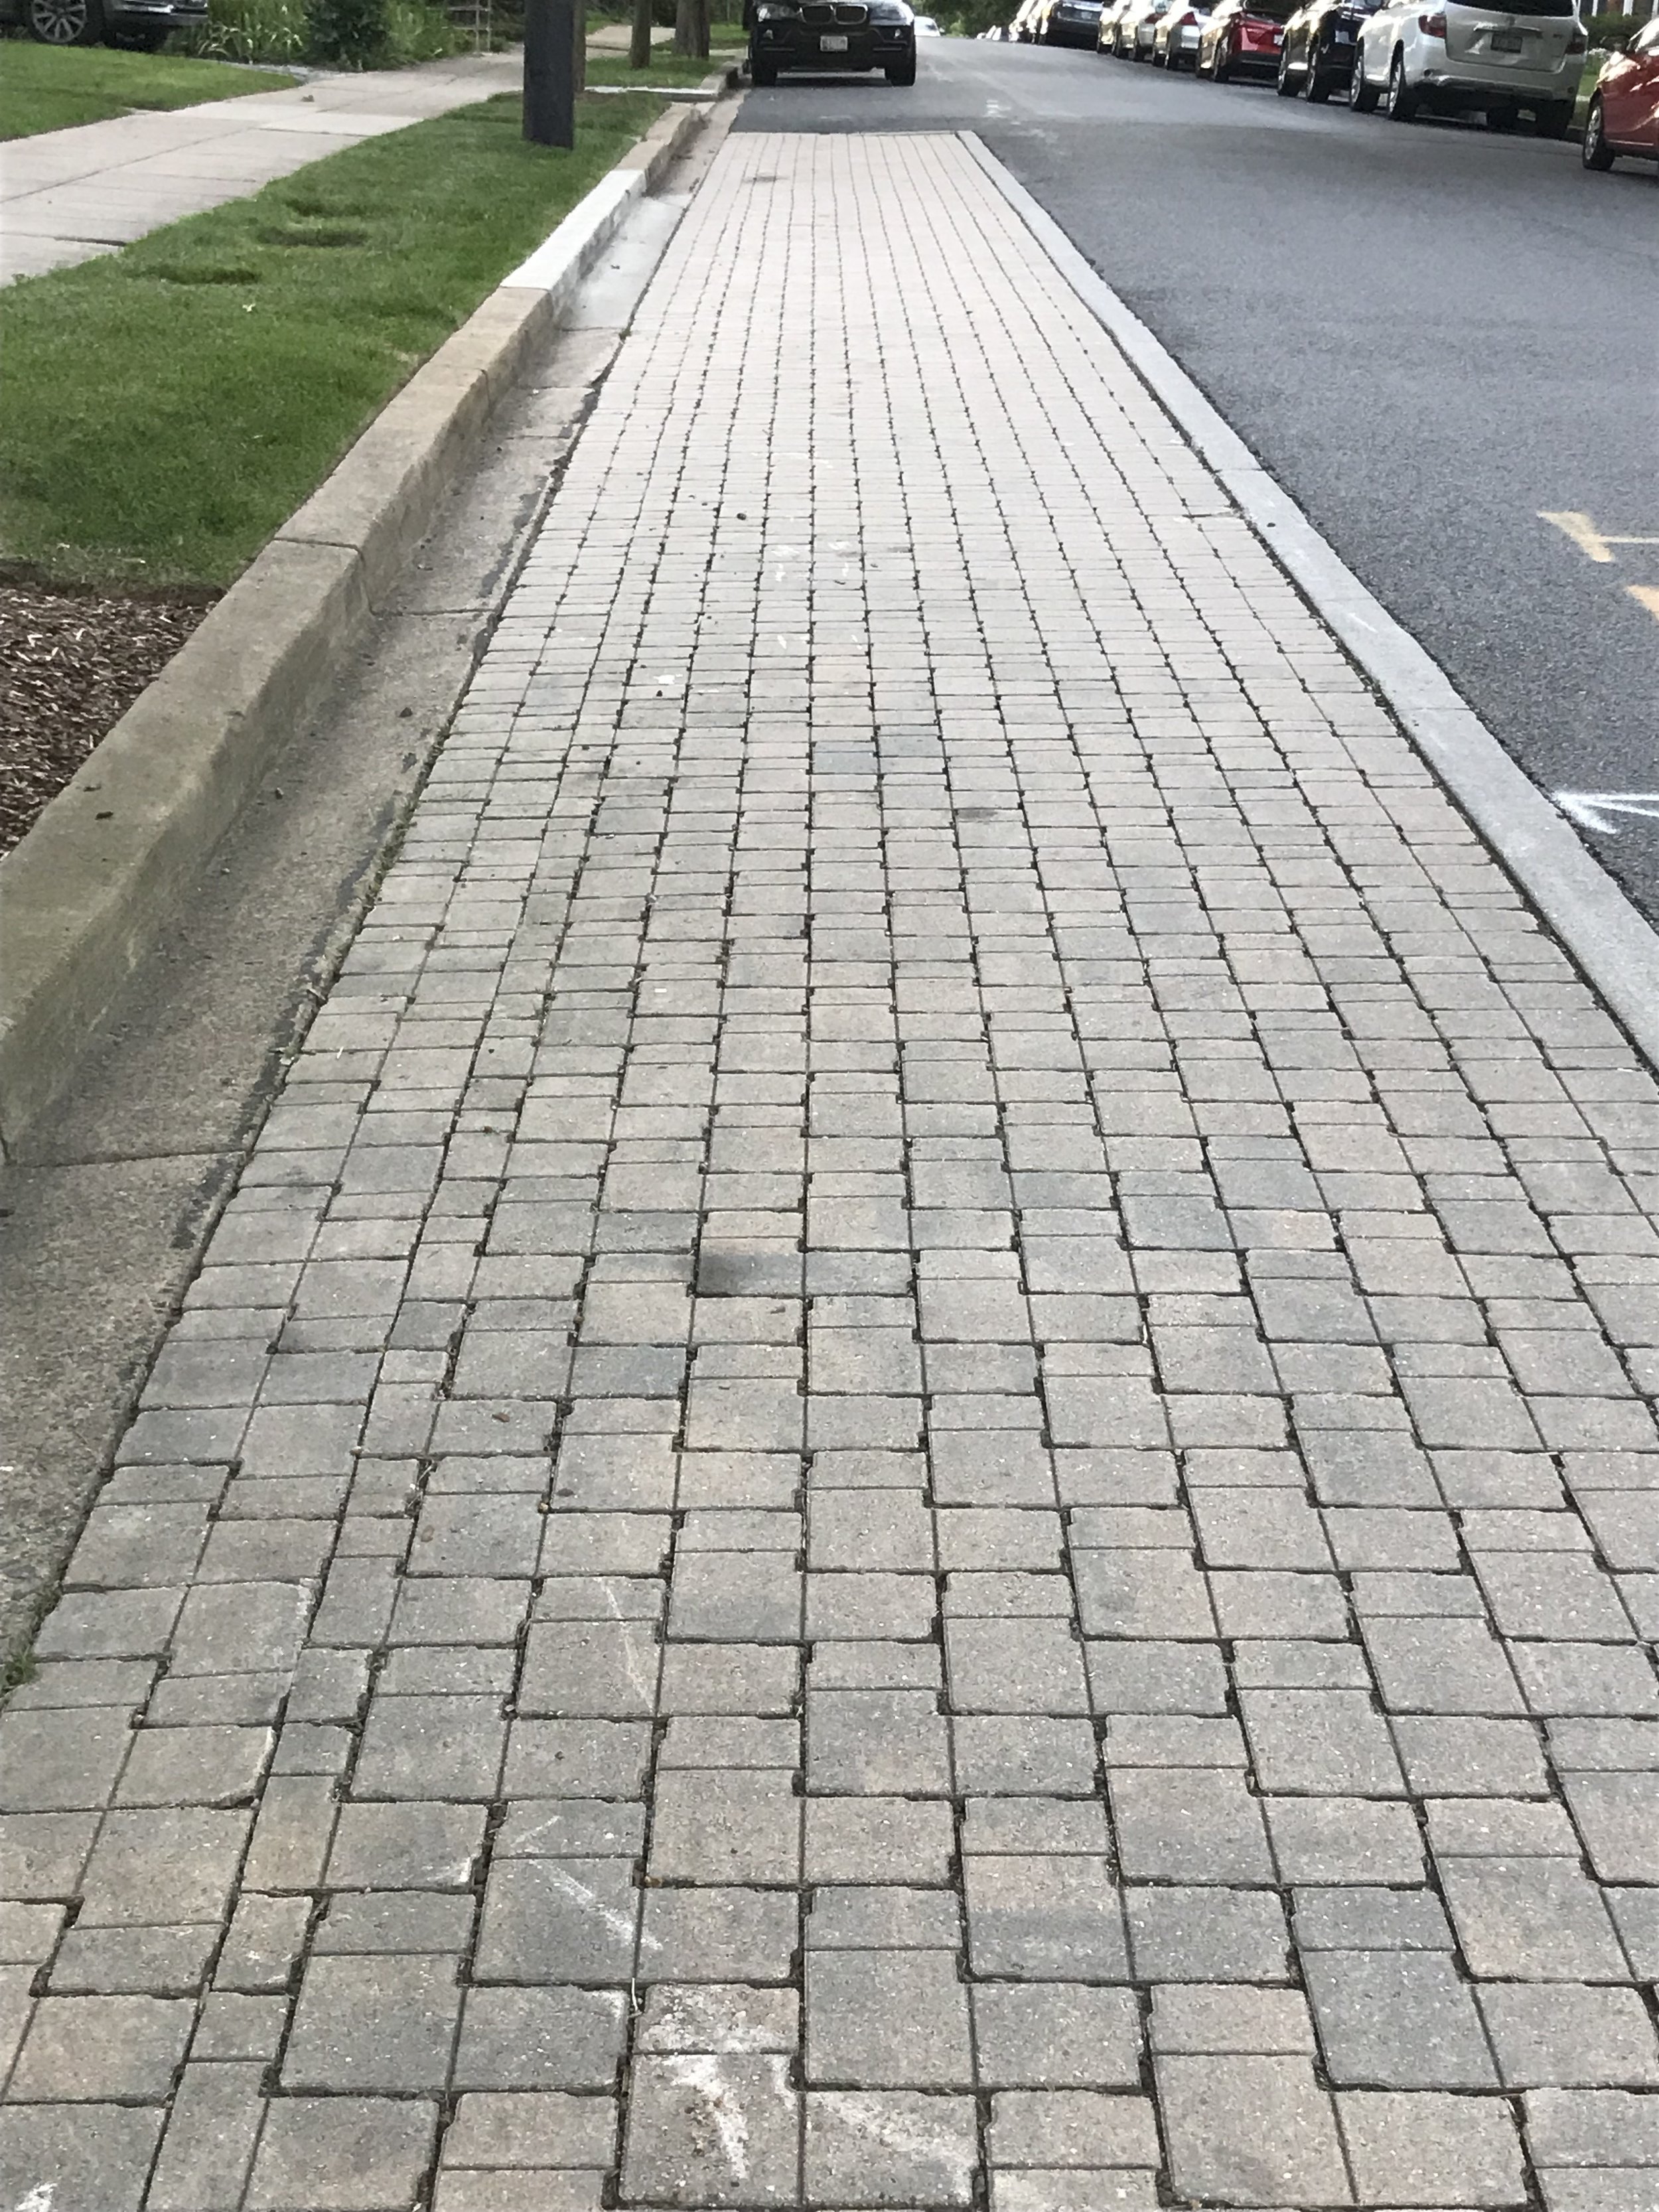 Porous, higher albedo pavers alongside streets absorb rain that runs off impervious pavement, reducing flood risk and water pollution.